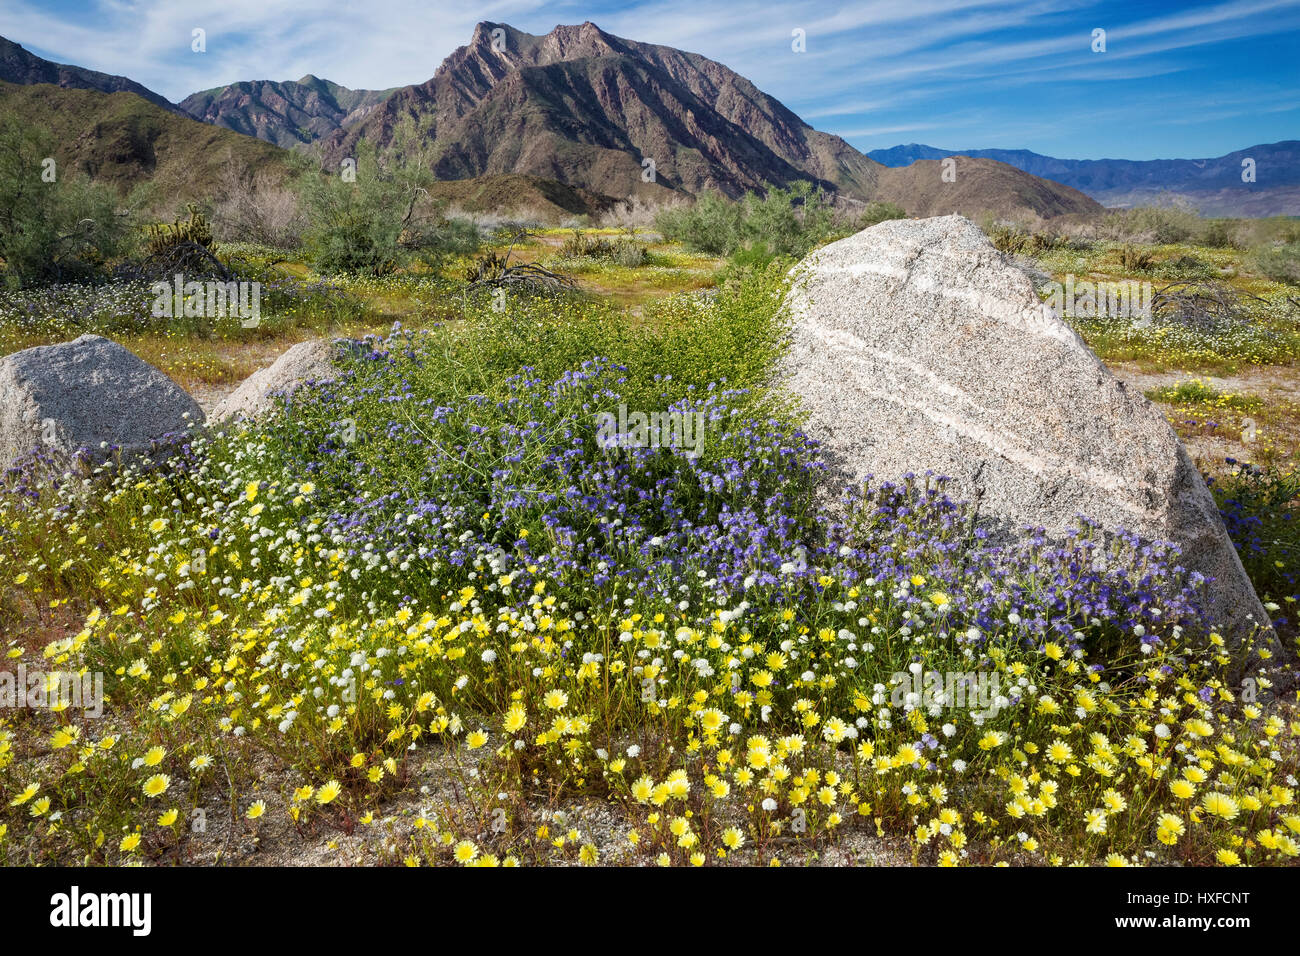 Spring flowers blooming in Anza-Borrego Desert State Park, California, USA 2017 Stock Photo